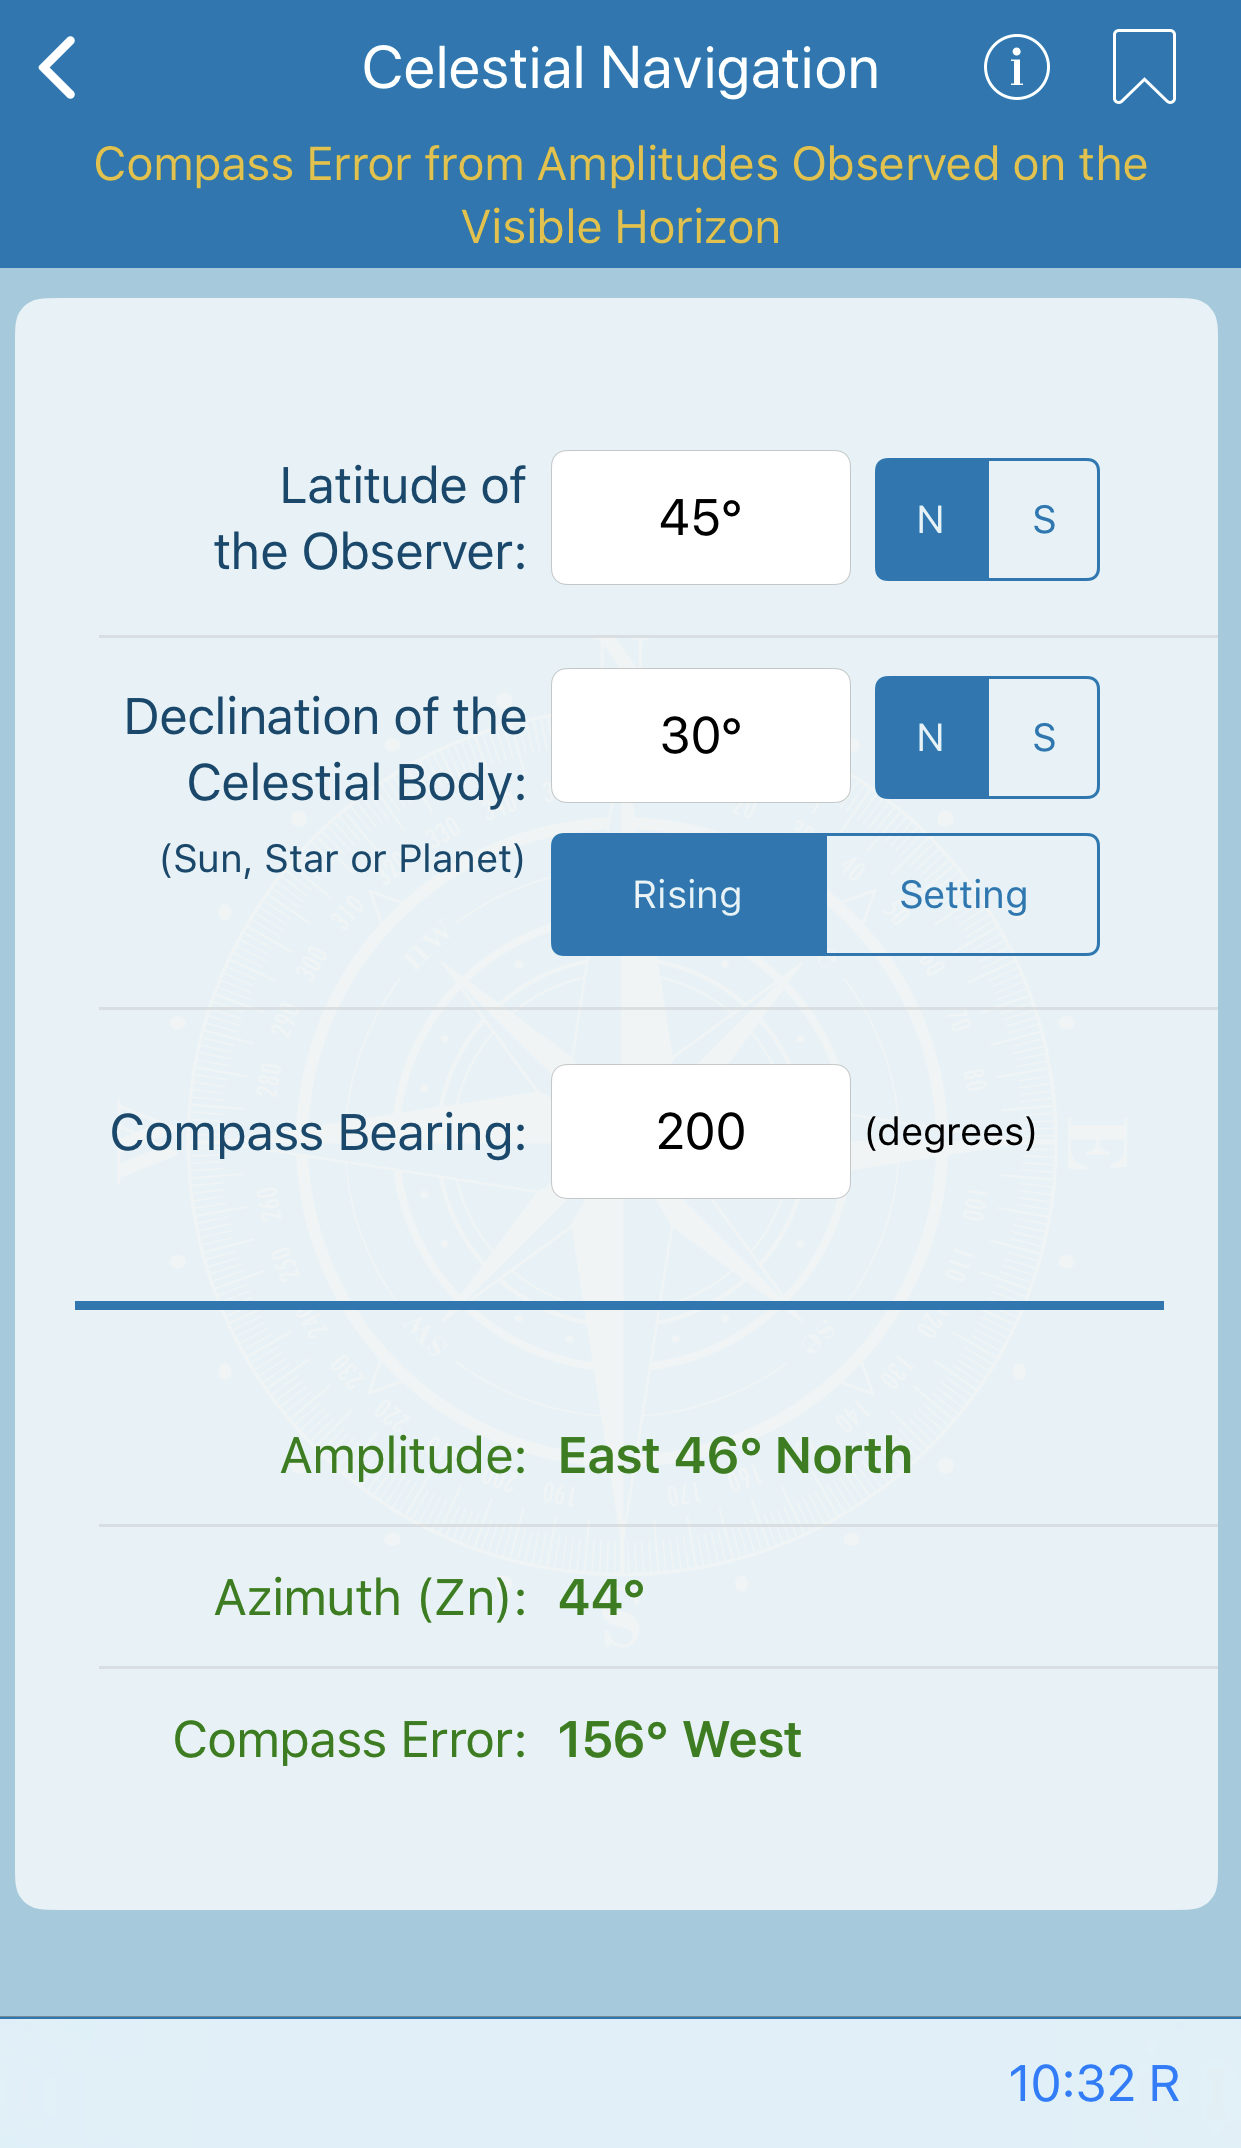 Compass Error from Amplitudes Observed on the Visible Horizon